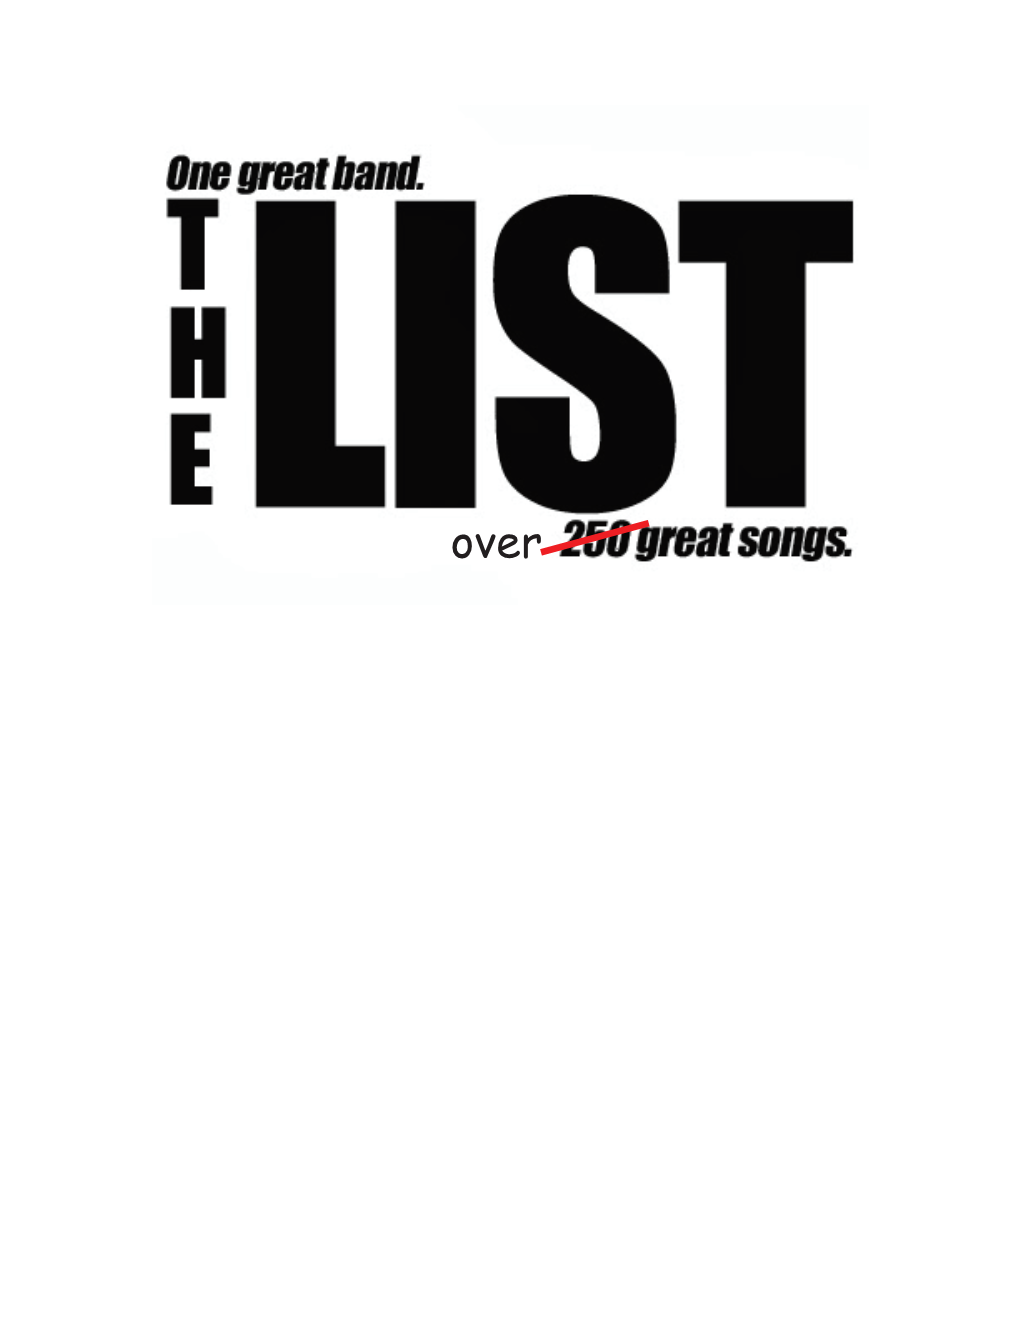 THE LIST Is : A) the Result of a Lifelong Love of - and Dedication to - Rock and Roll